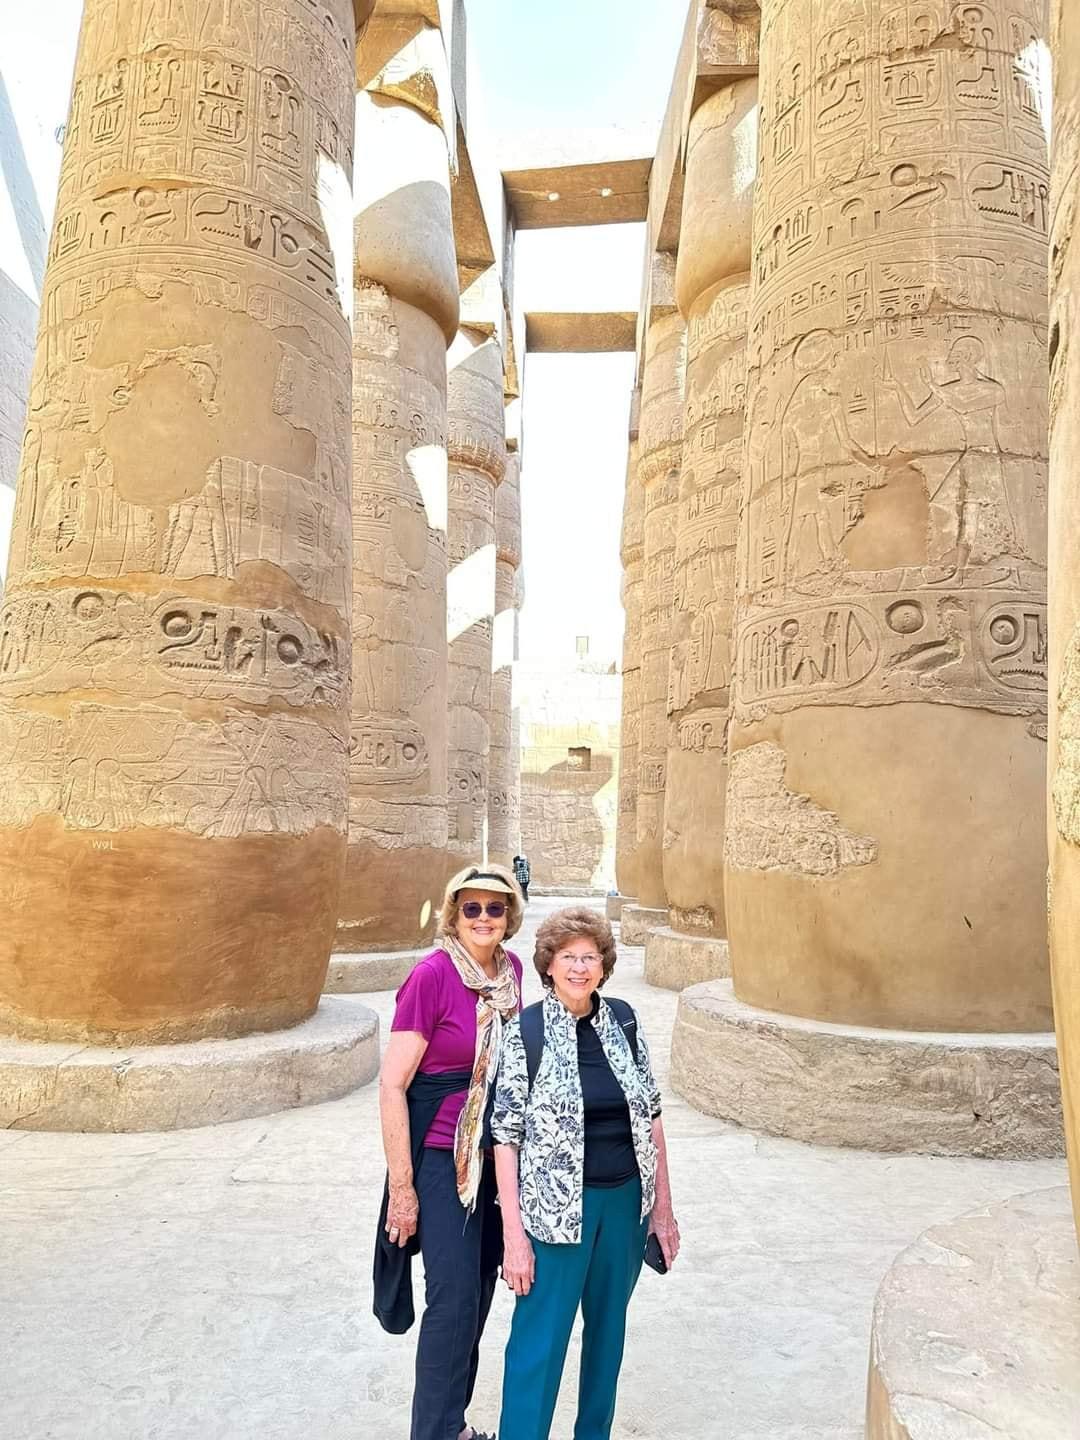 Temple Complex Luxor, Egypt. (Courtesy of Around the World at 80)